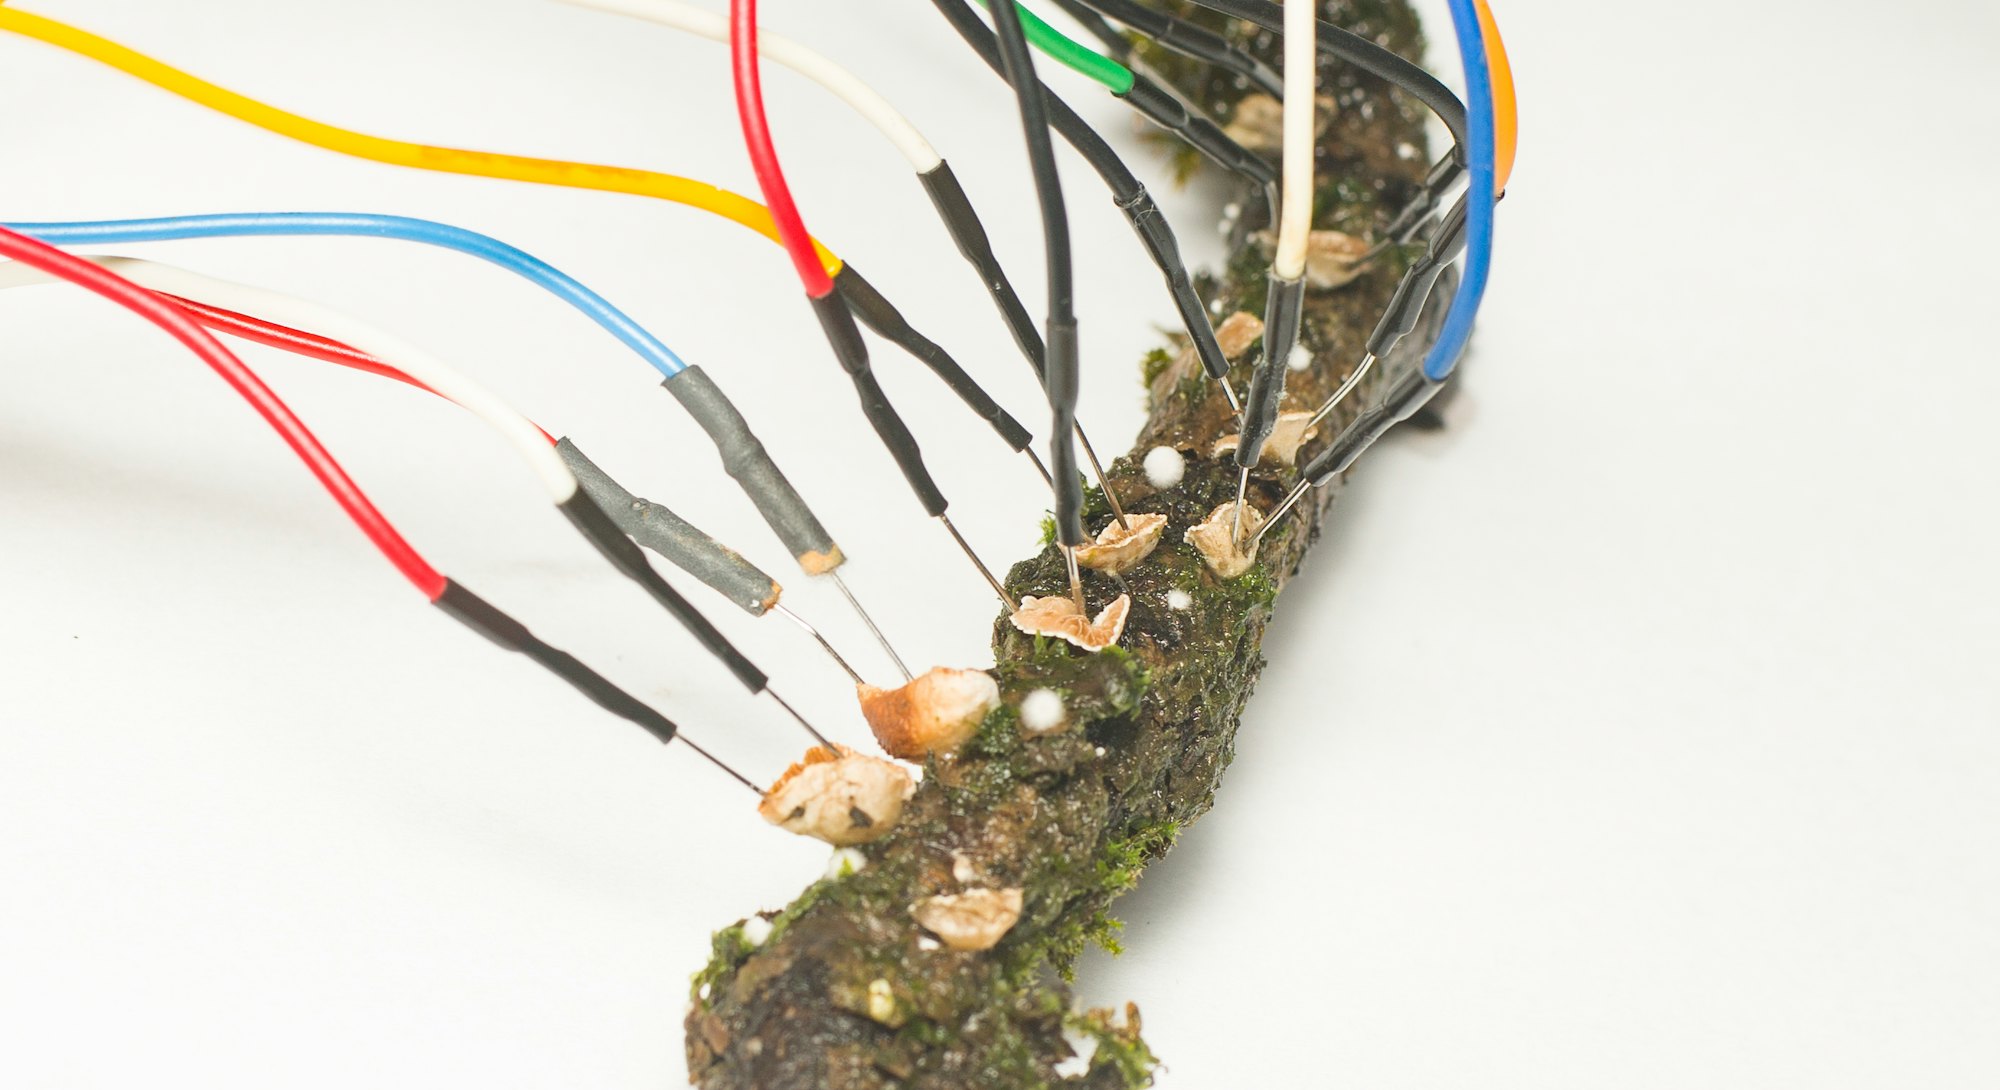 Fungi on a branch with electrodes attached